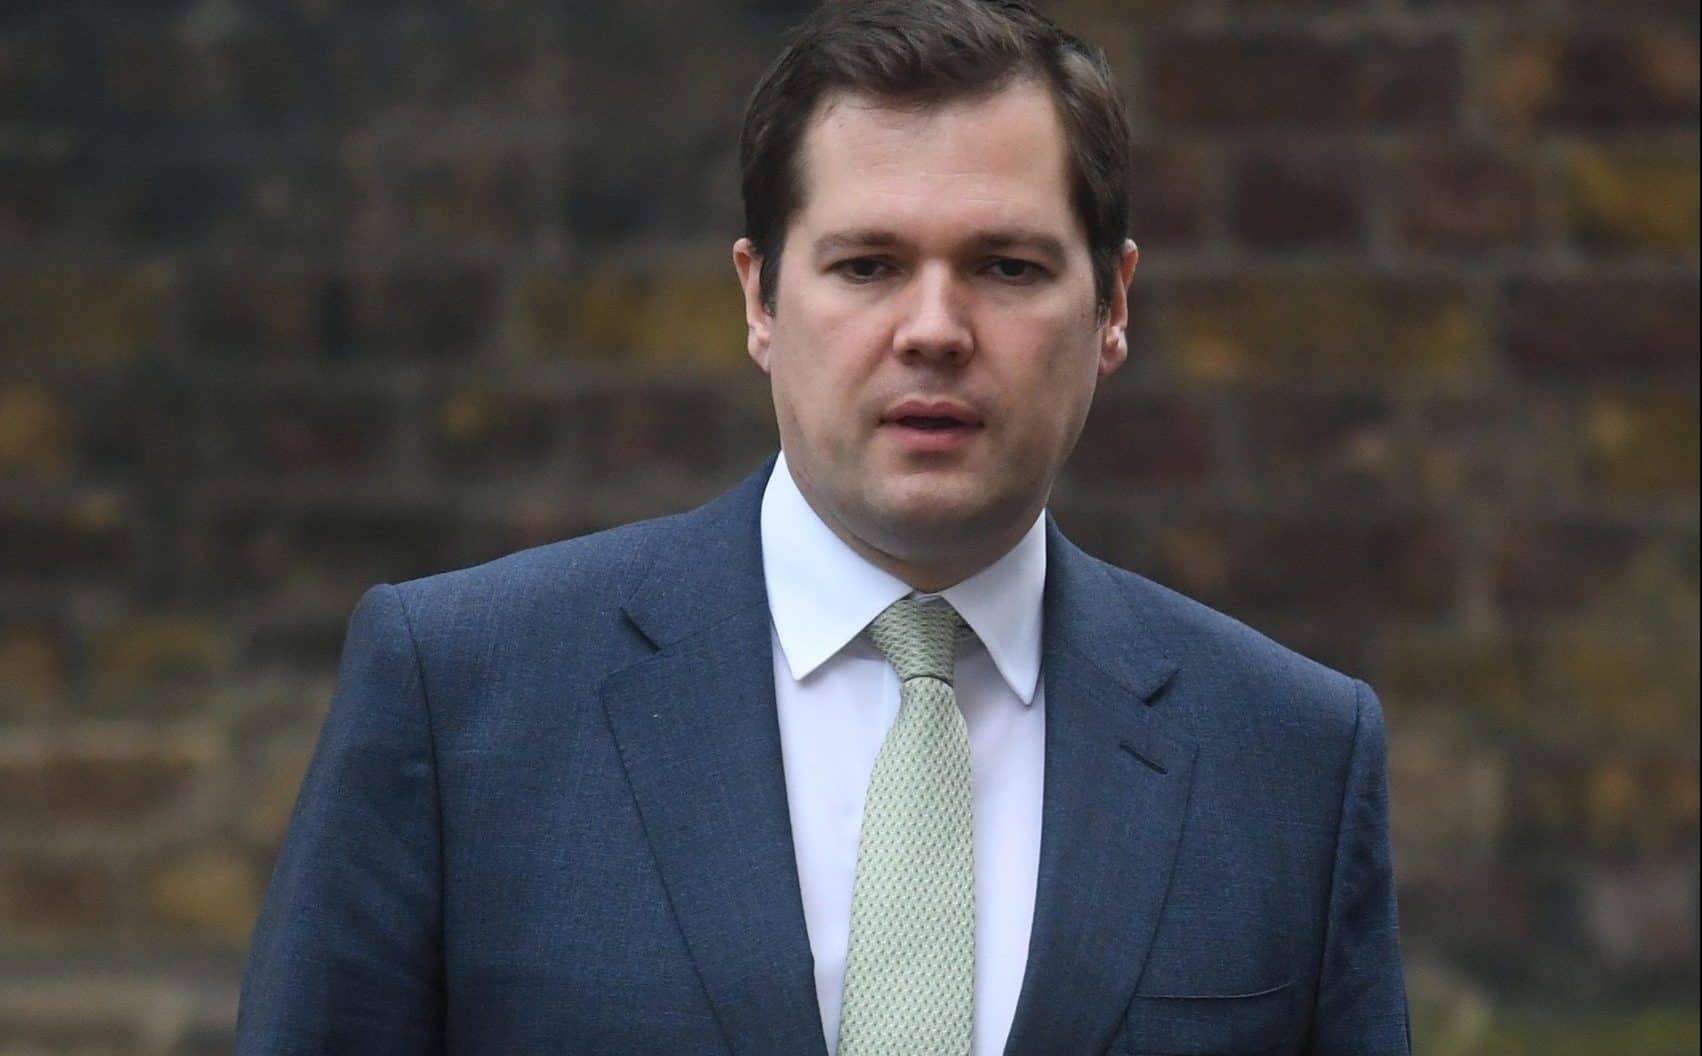 Housing Secretary sends junior minister to be quizzed over Tory donor project